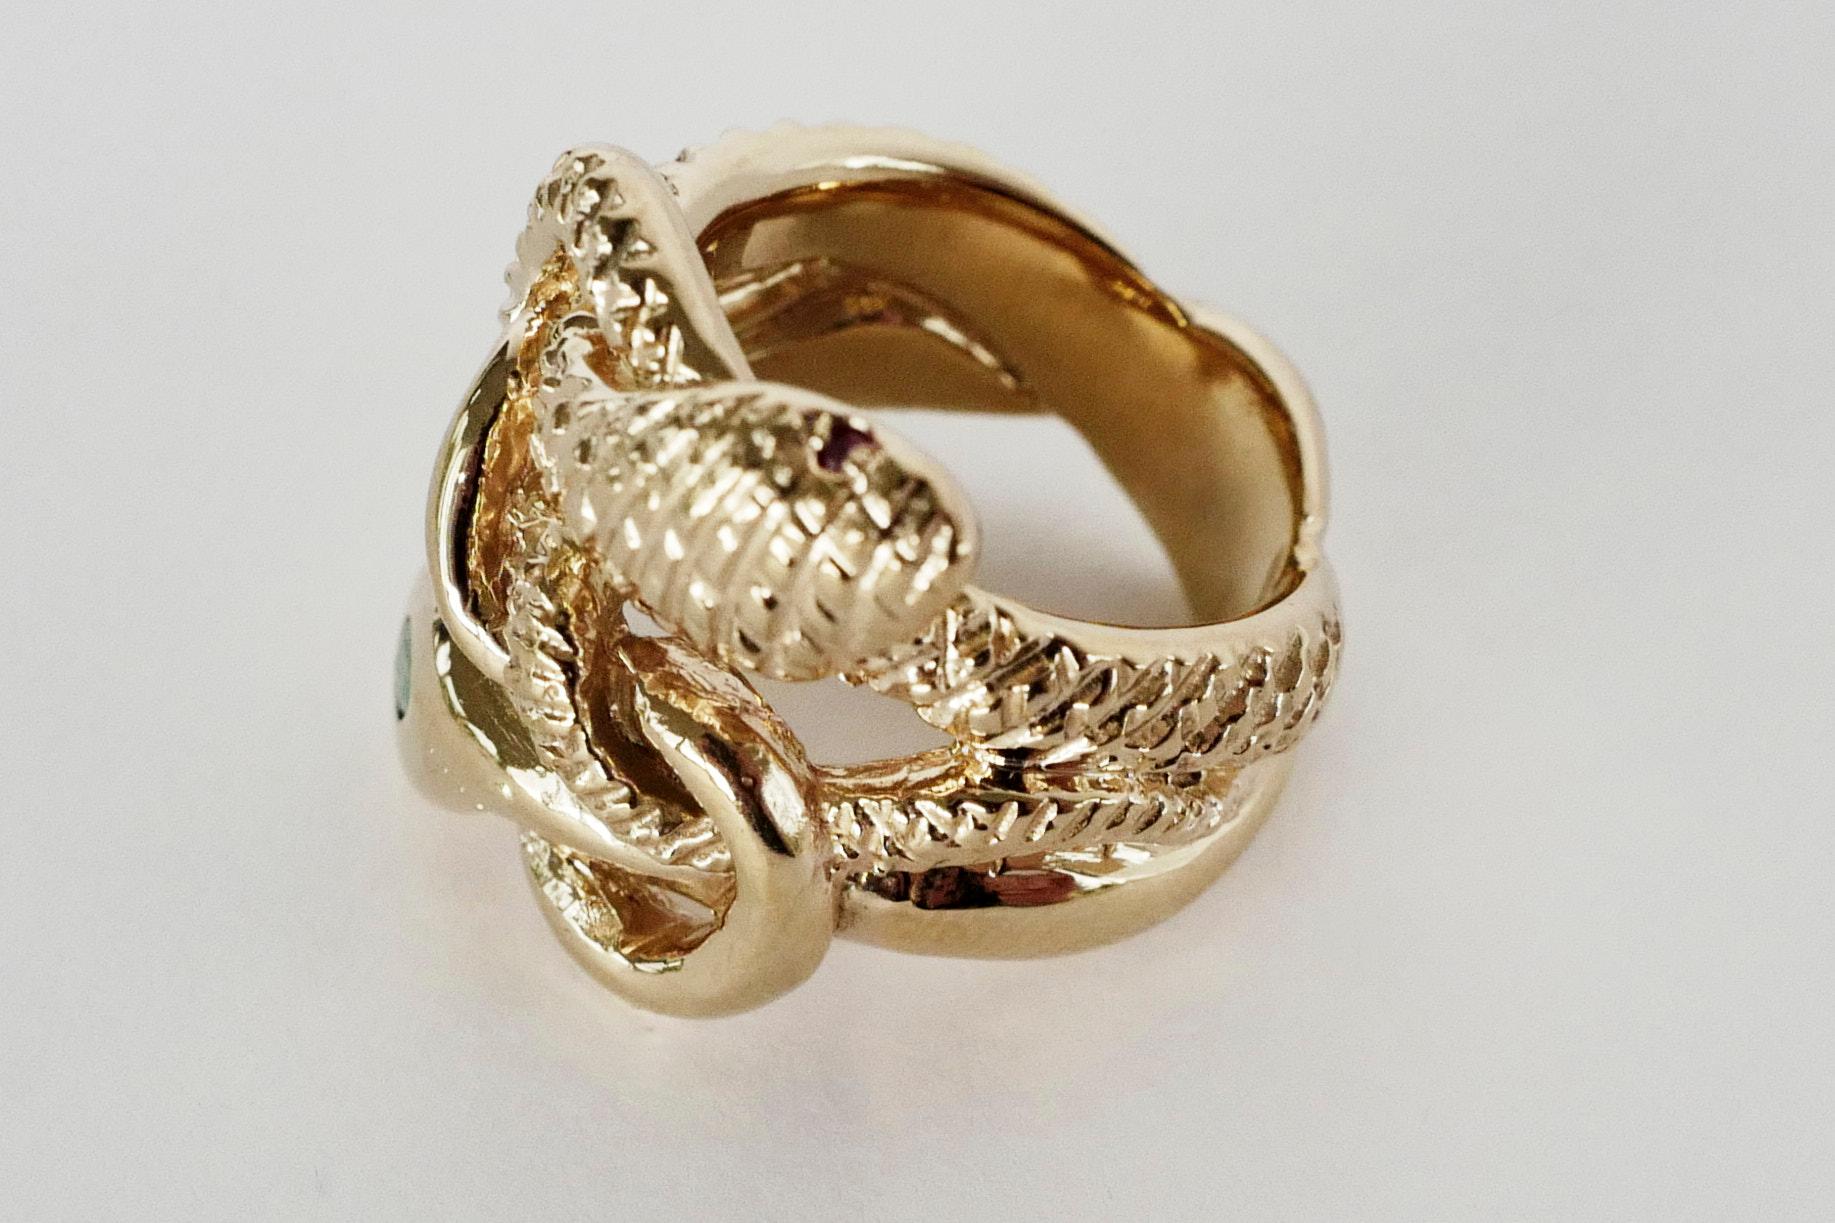 Emerald White Diamond Snake Ring Gold Cocktail Ring Victorian Style J Dauphin For Sale 2